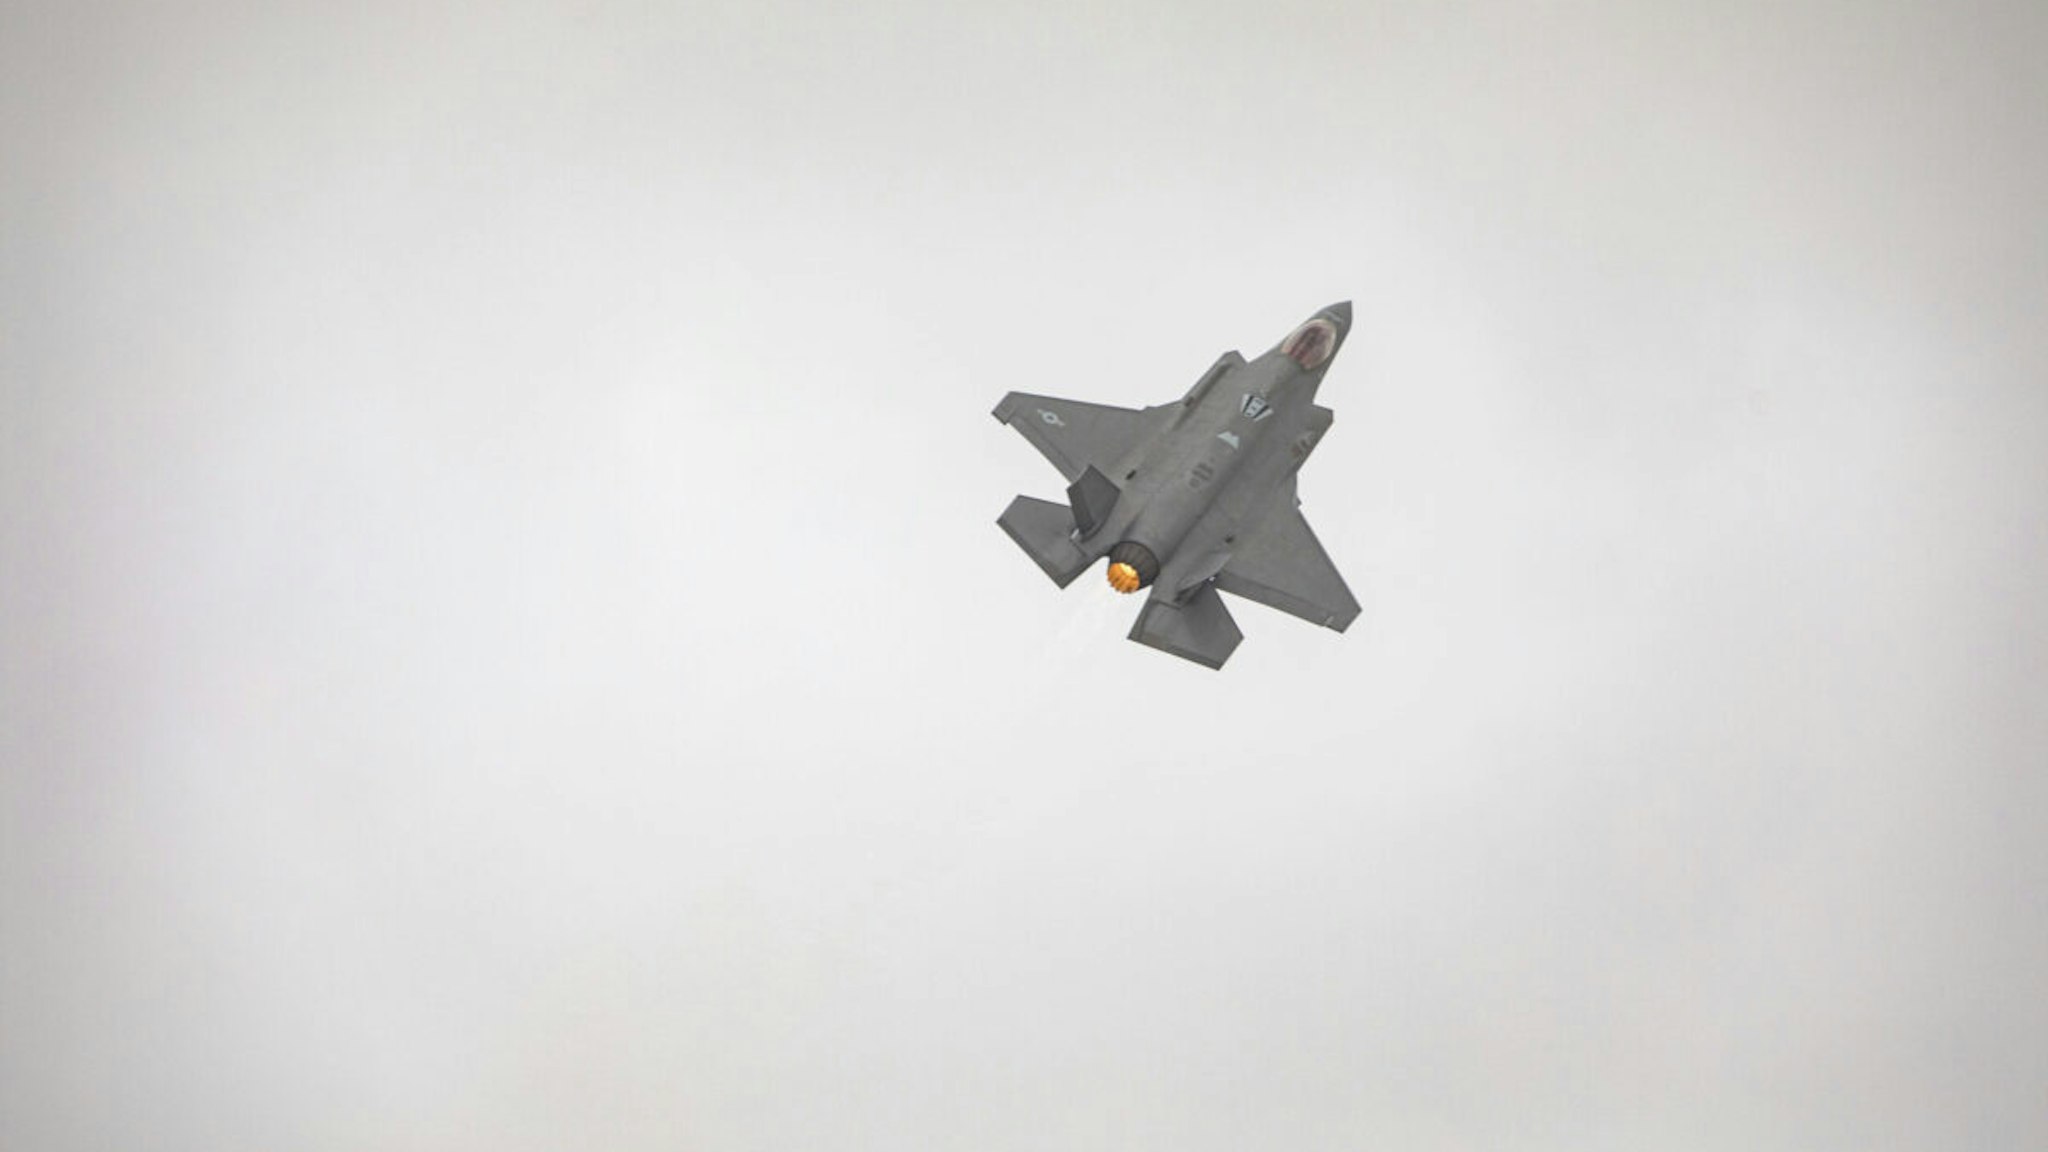 An F-35 Lightning II performs at the 2023 NAF El Centro Air Show at Naval Air Facility El Centro on March 11, 2023 in El Centro, California.